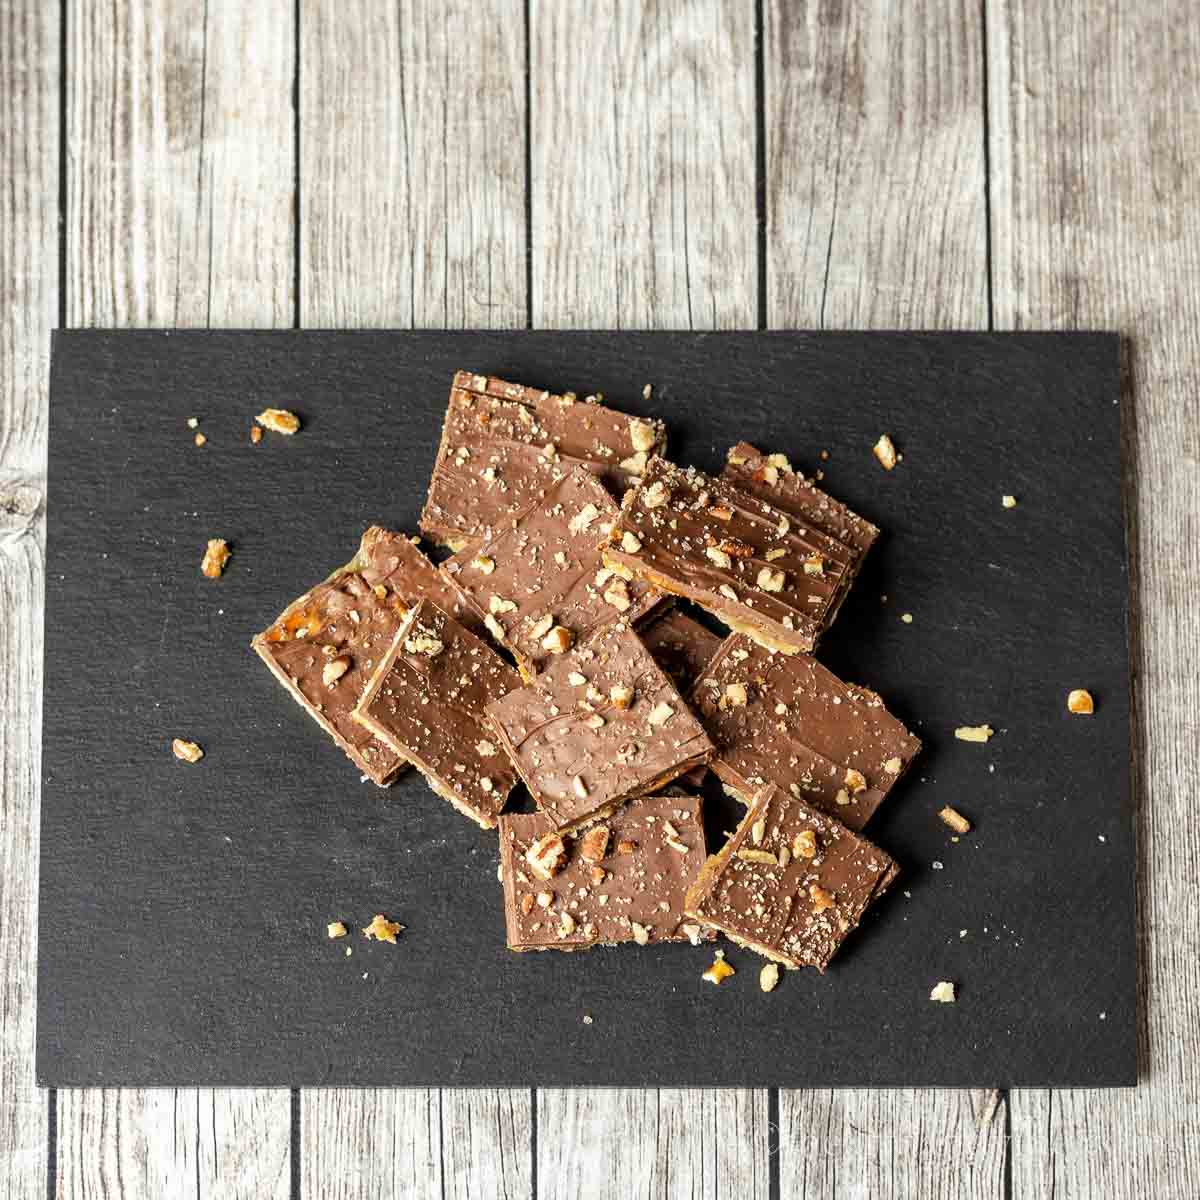 Black slate with pretzel toffee cut up in pieces.